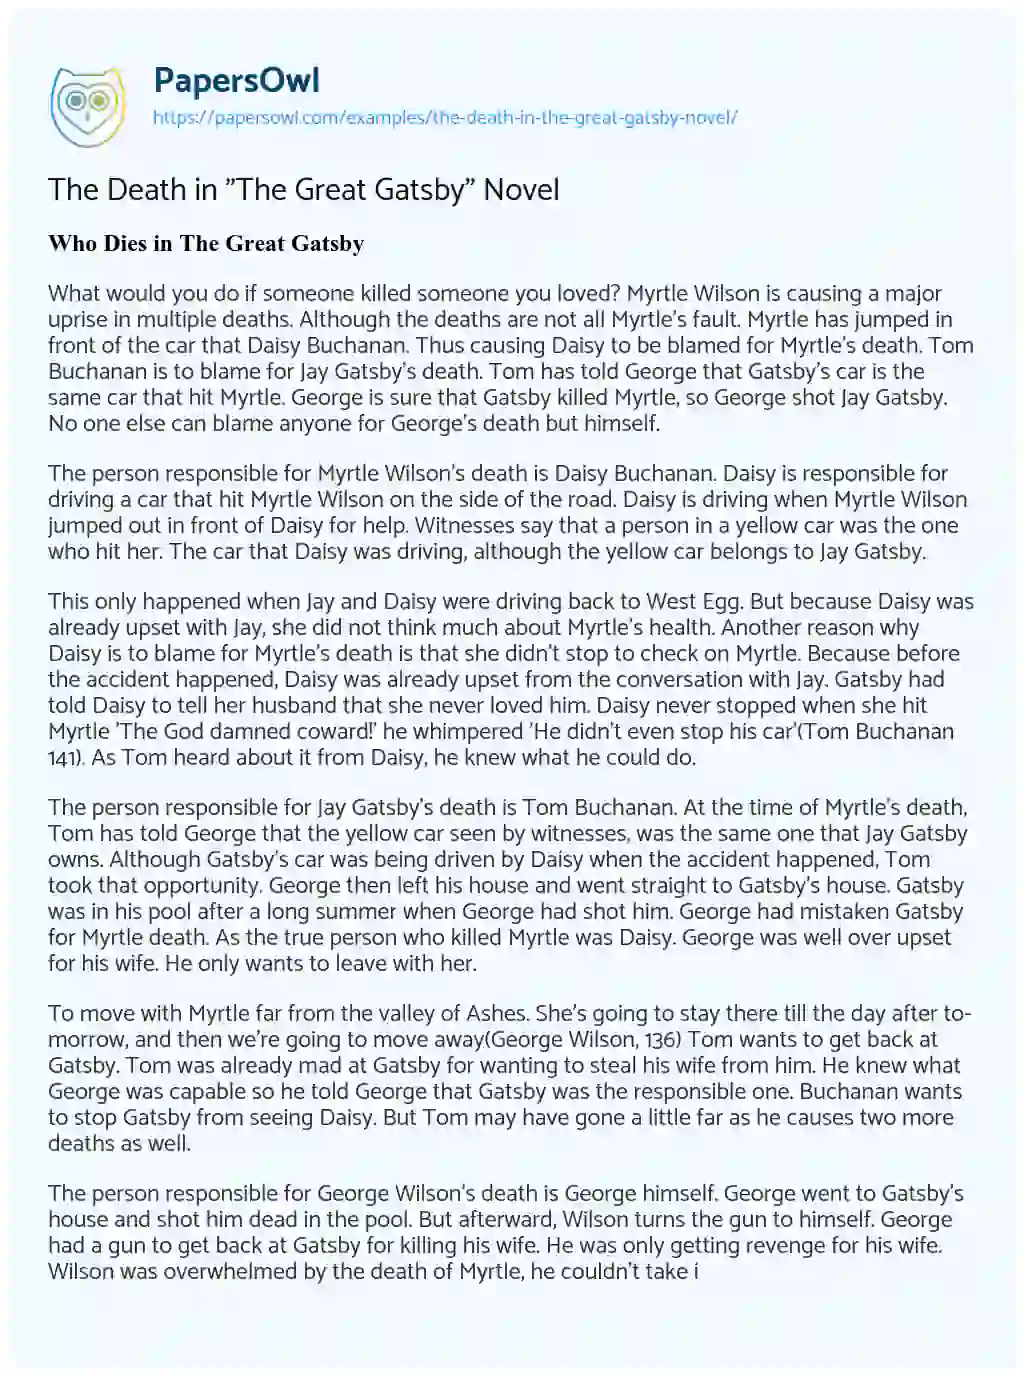 Essay on The Death in “The Great Gatsby” Novel